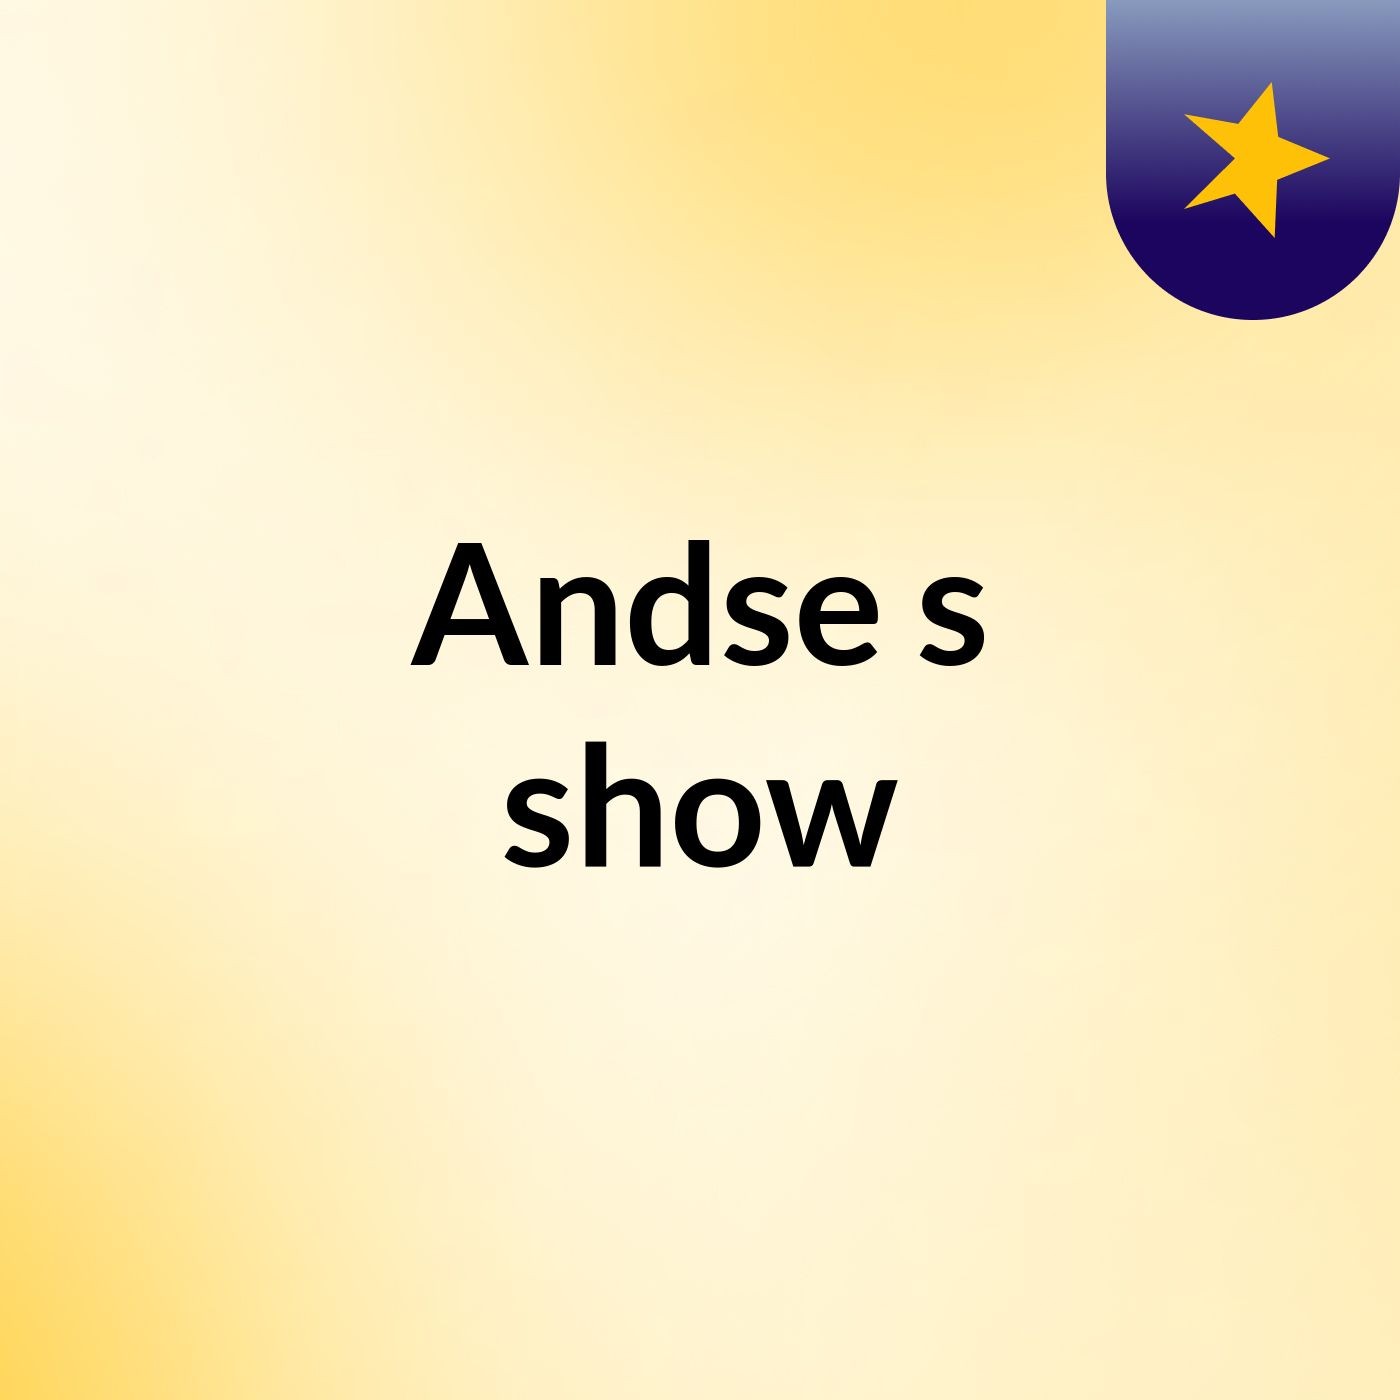 Andse's show